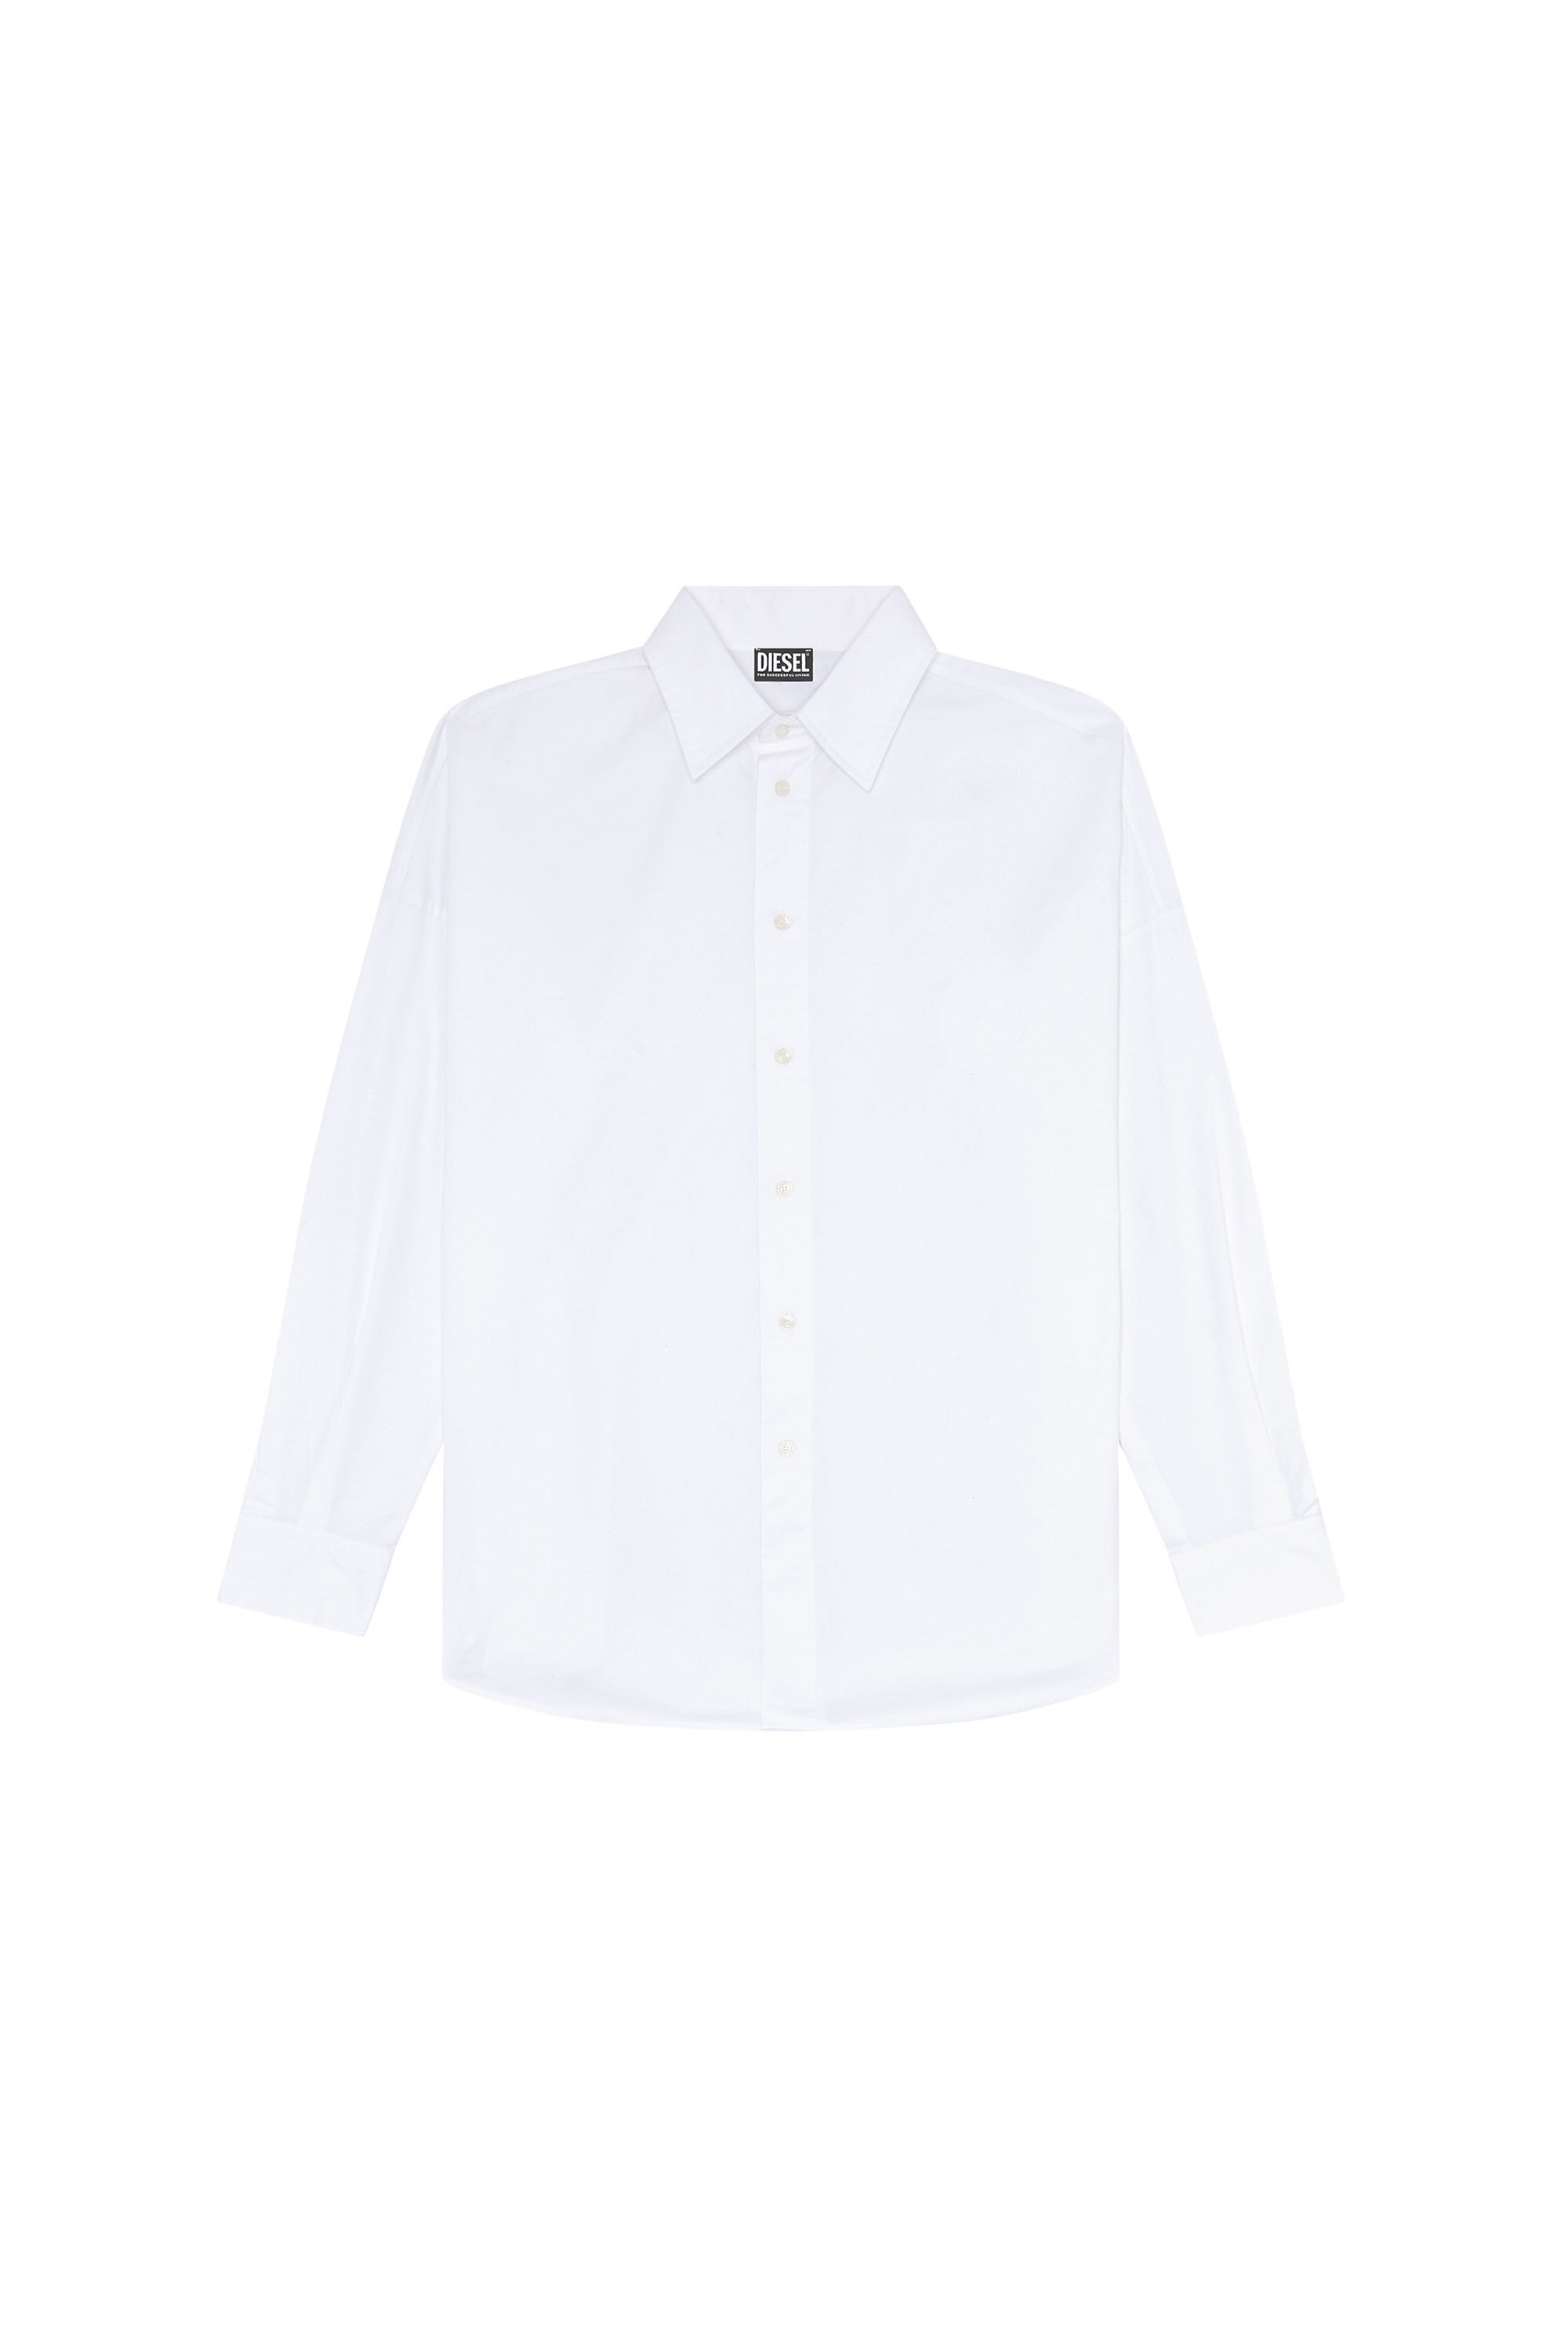 Diesel - S-LIMO-LOGO, Man Shirt with maxi logo embroidery in White - Image 2